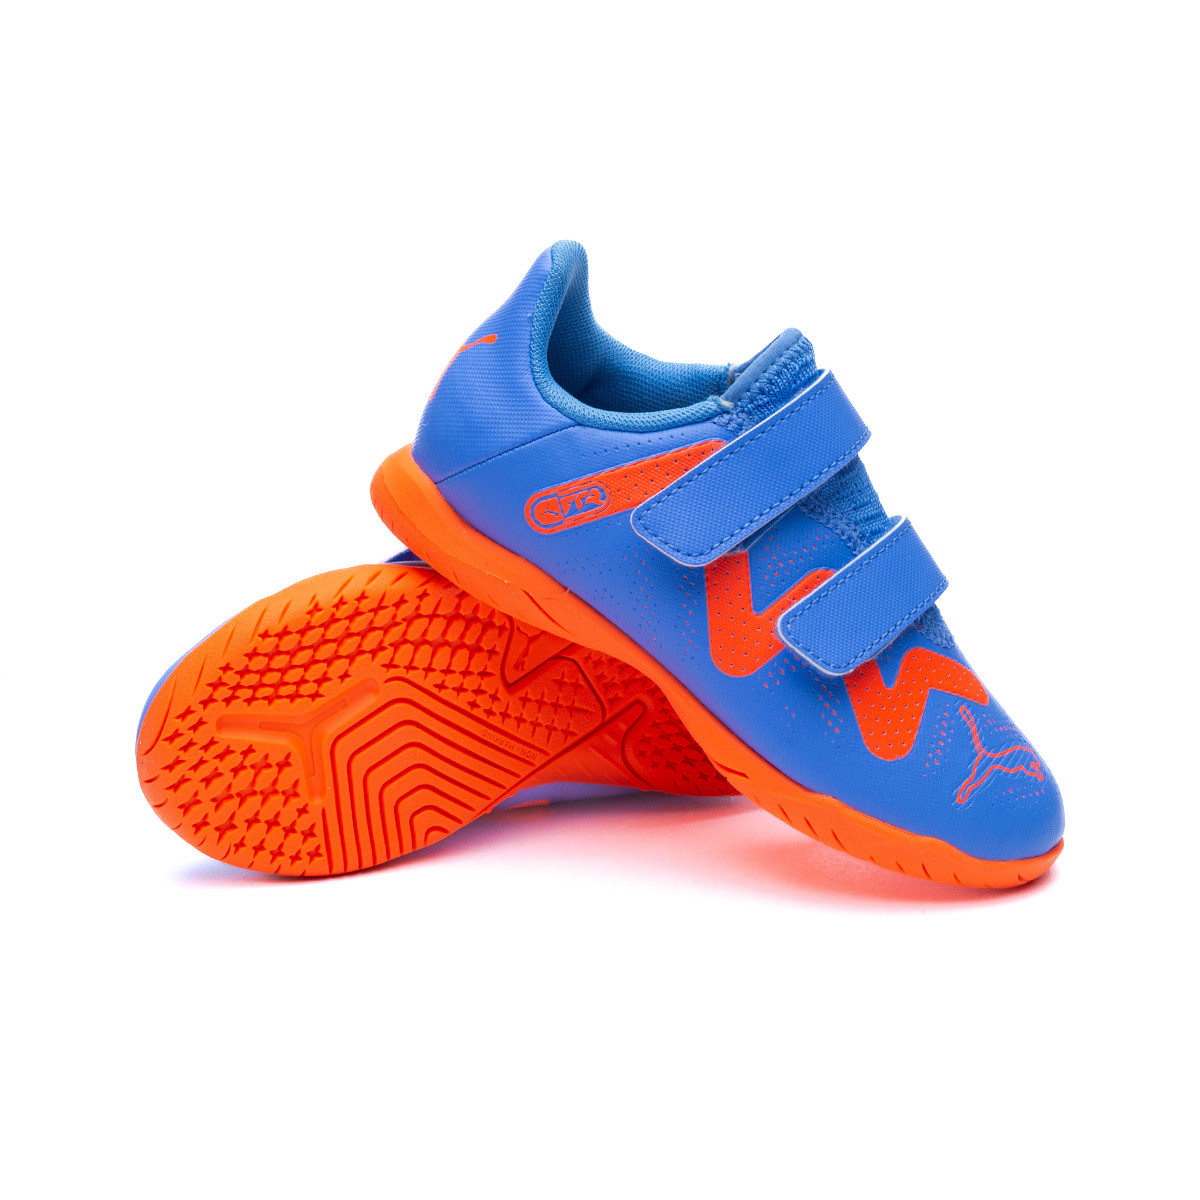 Chaussures de futsal FUTURE PLAY IT, red